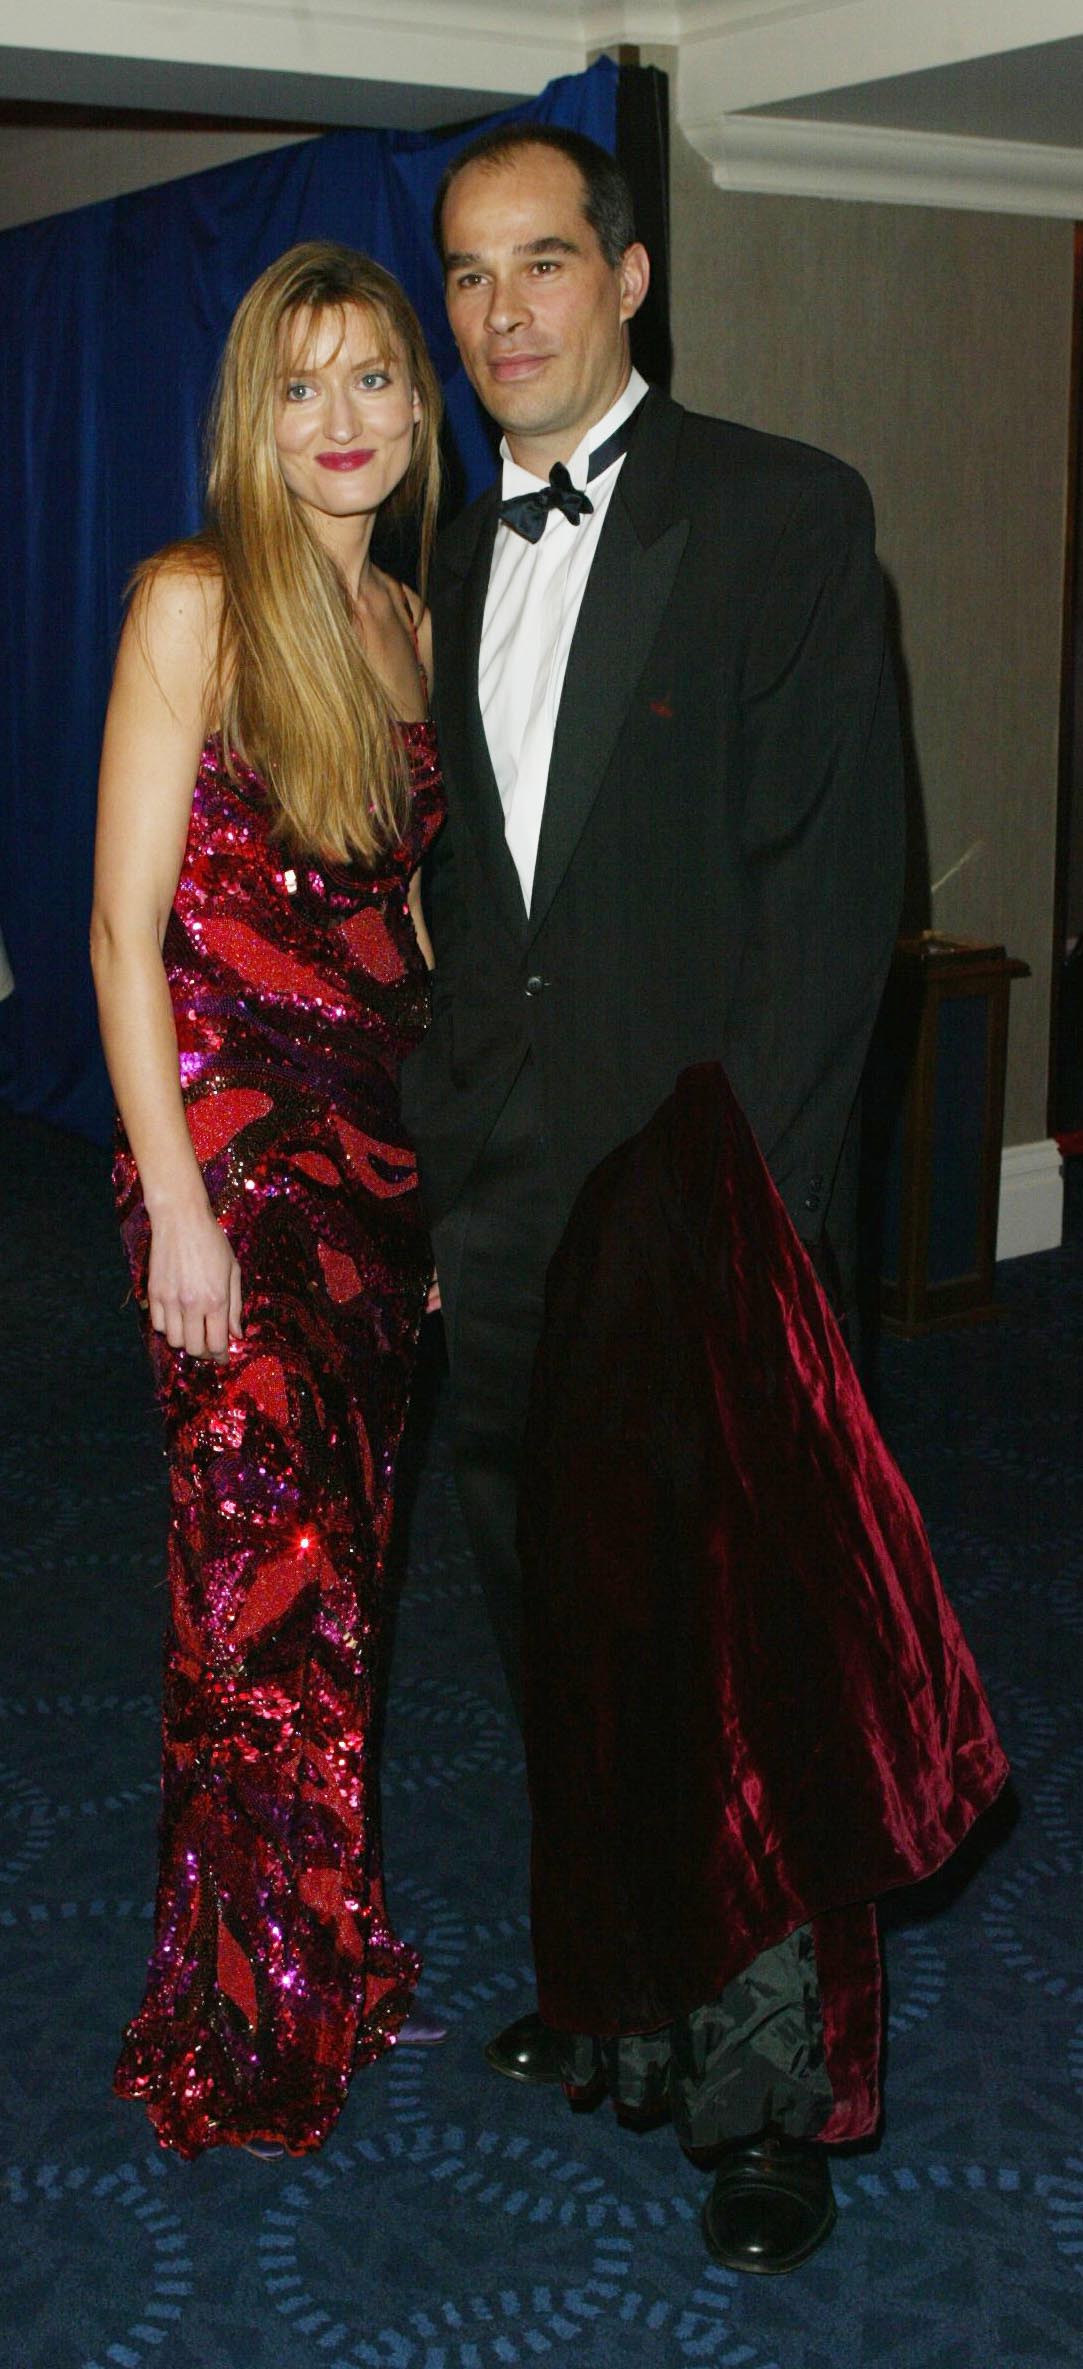 Natascha McElhone and husband Martin Kelly on February 24, 2002 in London | Source: Getty Images 